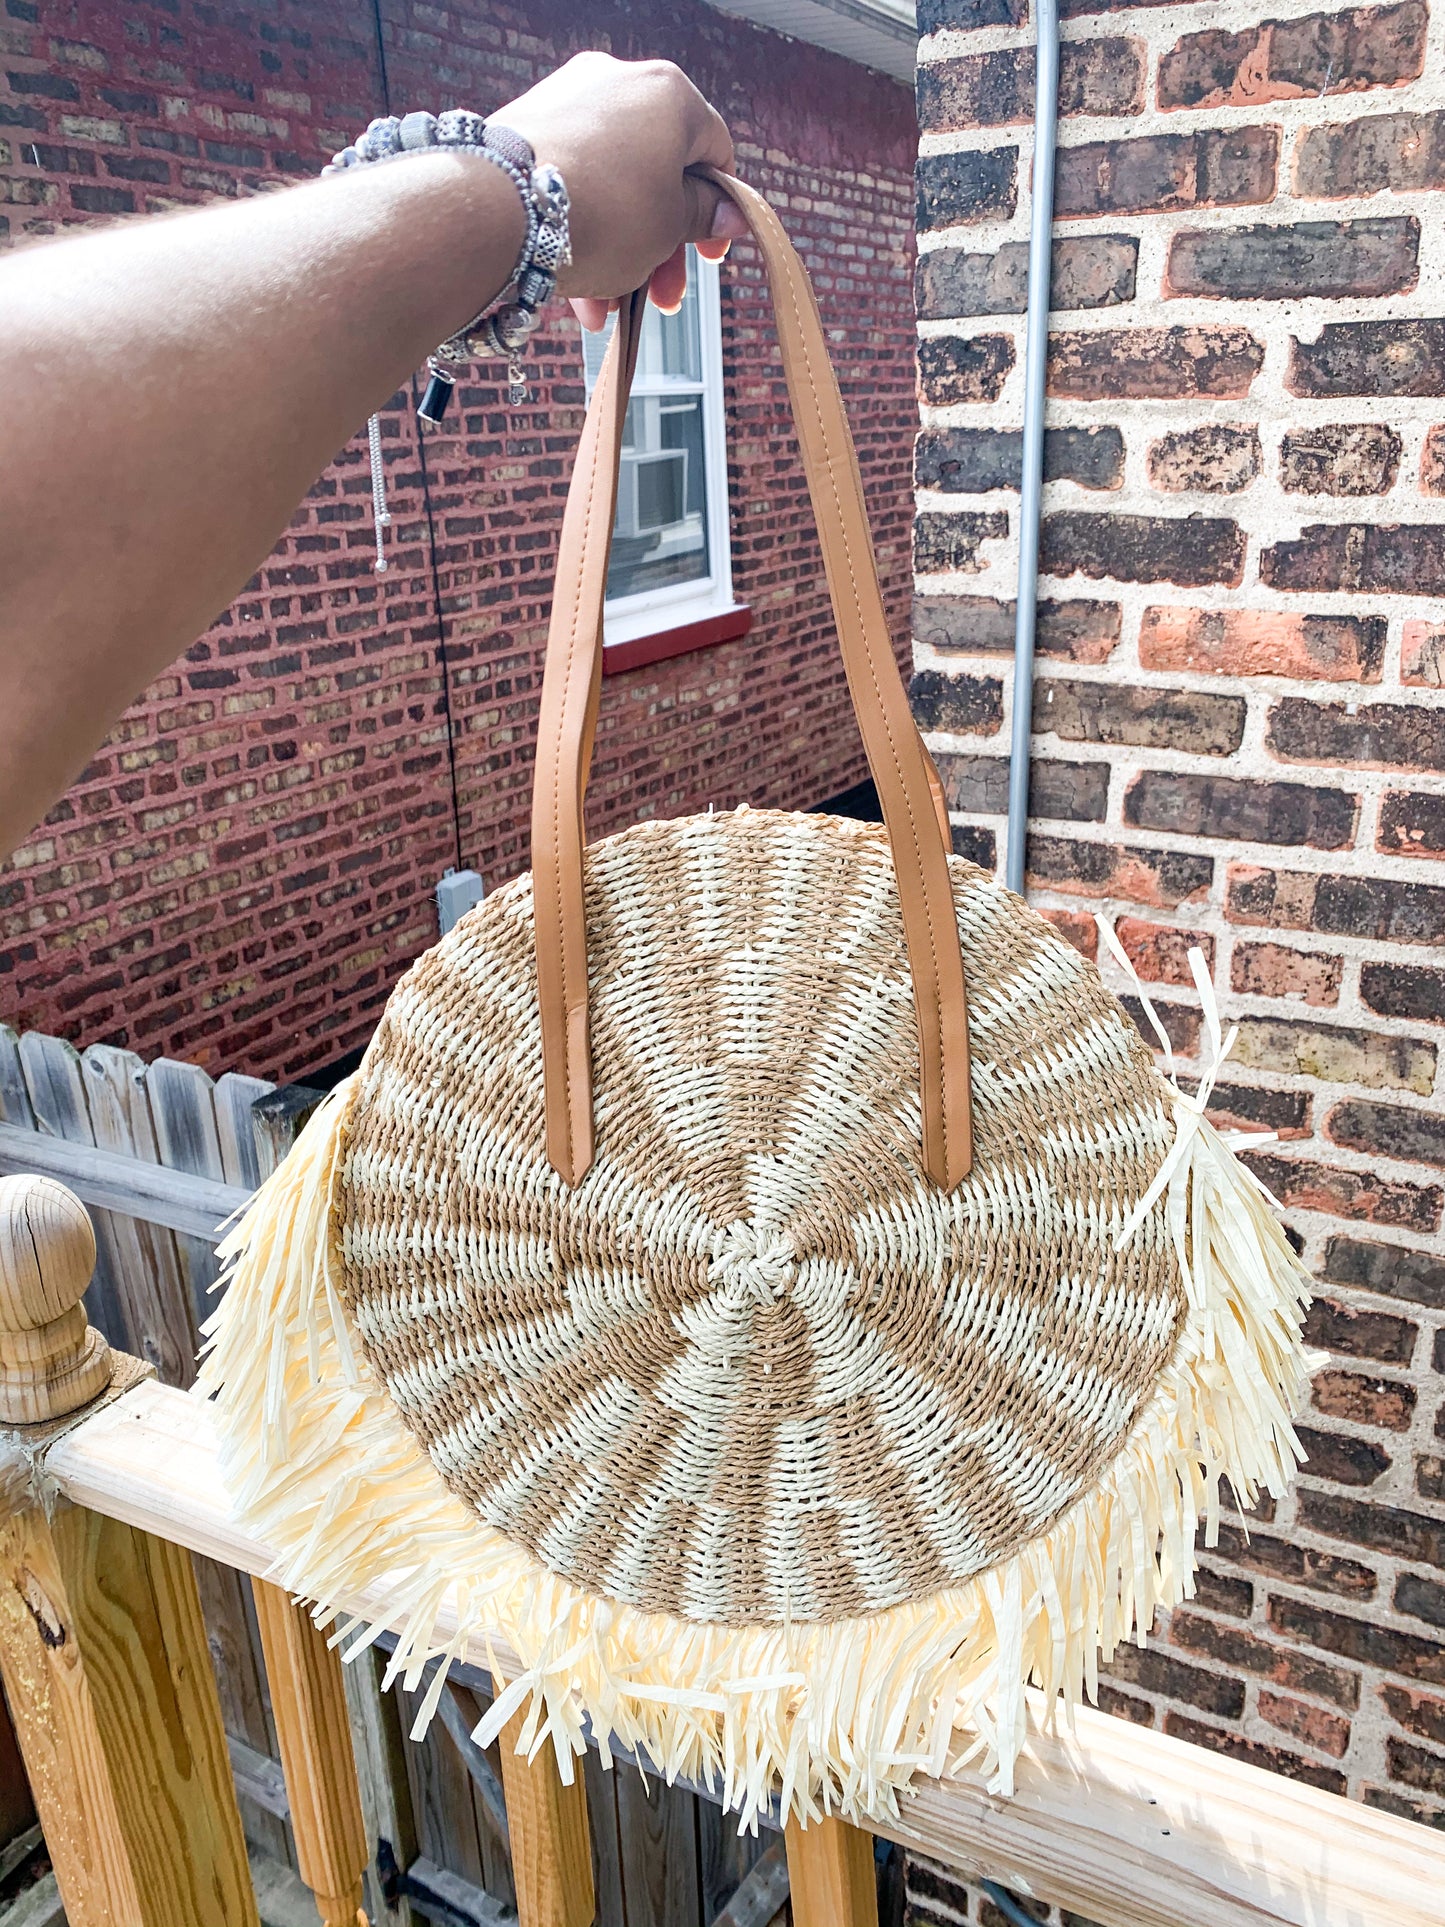 TIME FOR A TRIP STRAW BAG